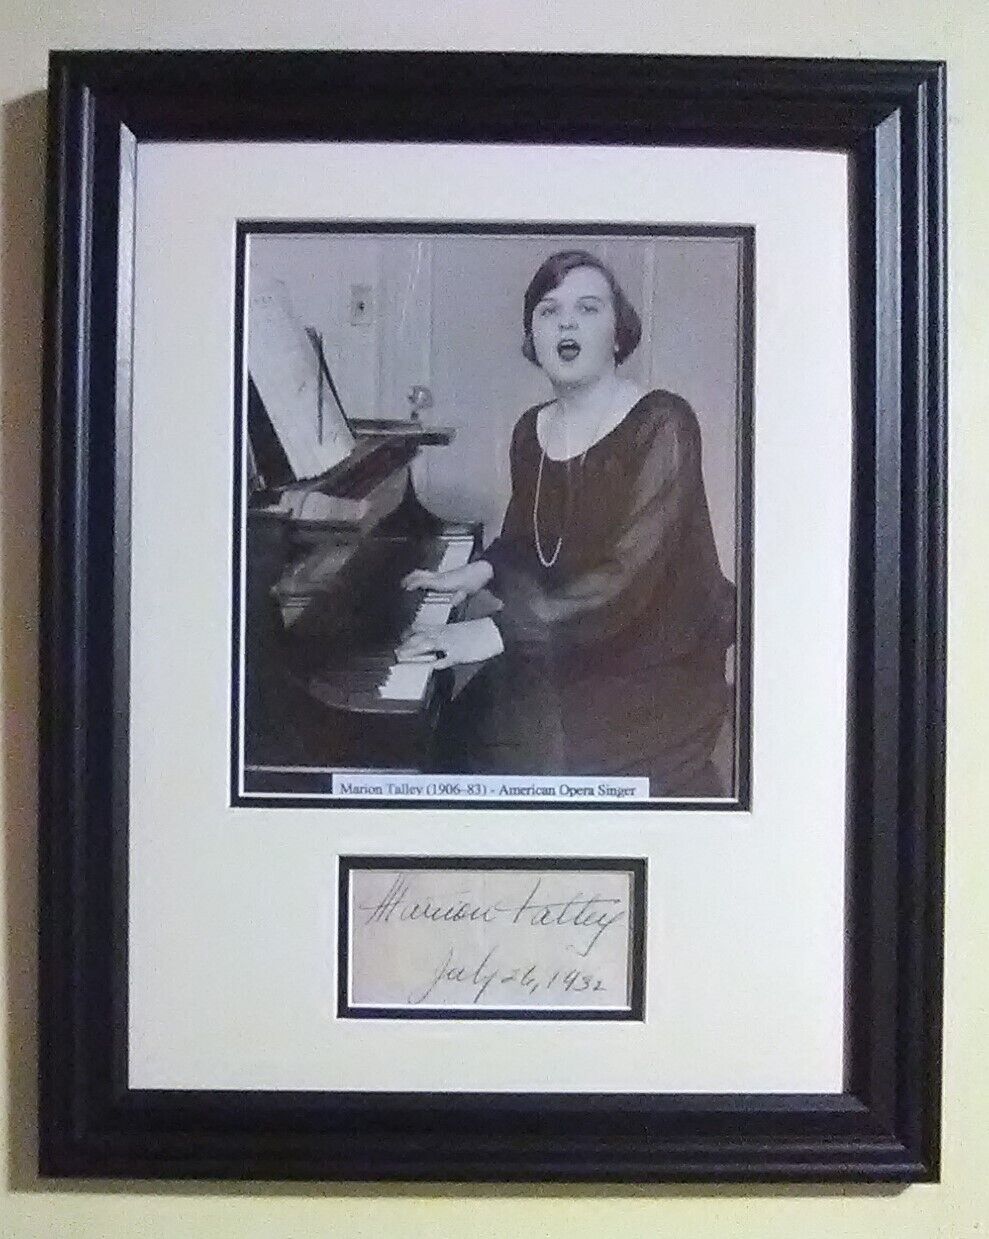 Marion Talley (1906 - 83) / Autograph / American Opera Singer / 10x13\